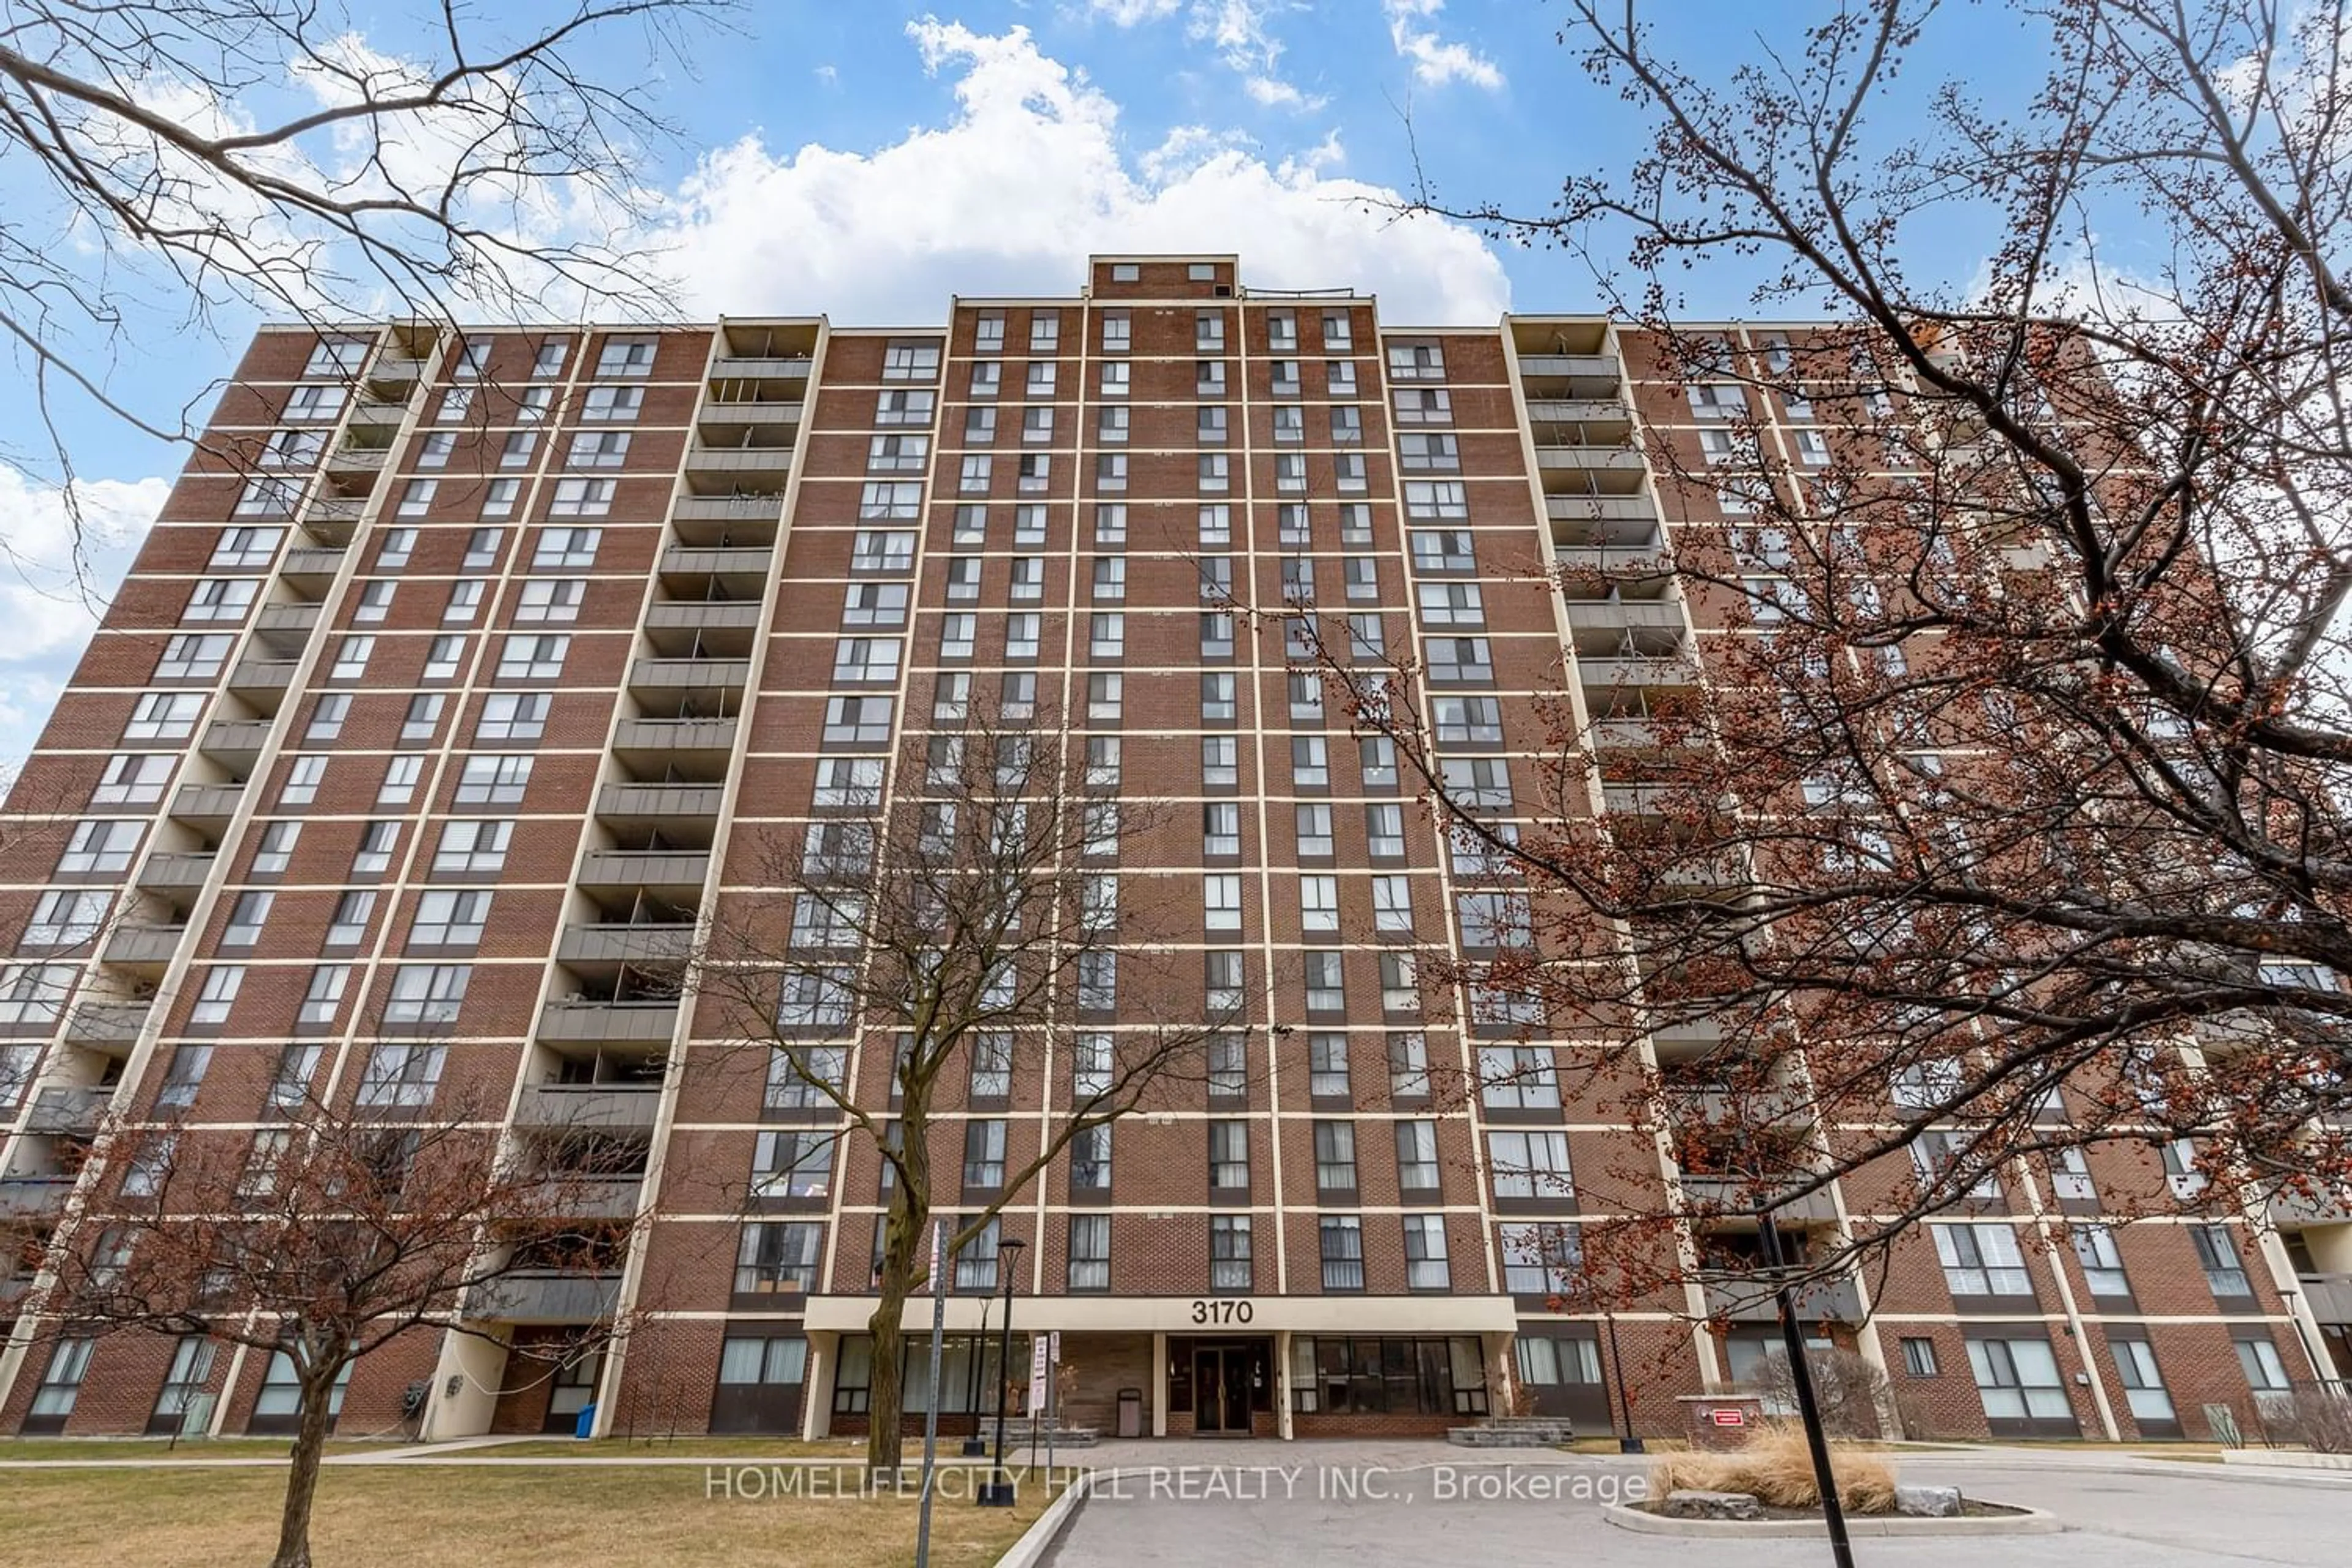 A pic from exterior of the house or condo for 3170 Kirwin Ave #608, Mississauga Ontario L5A 3R1